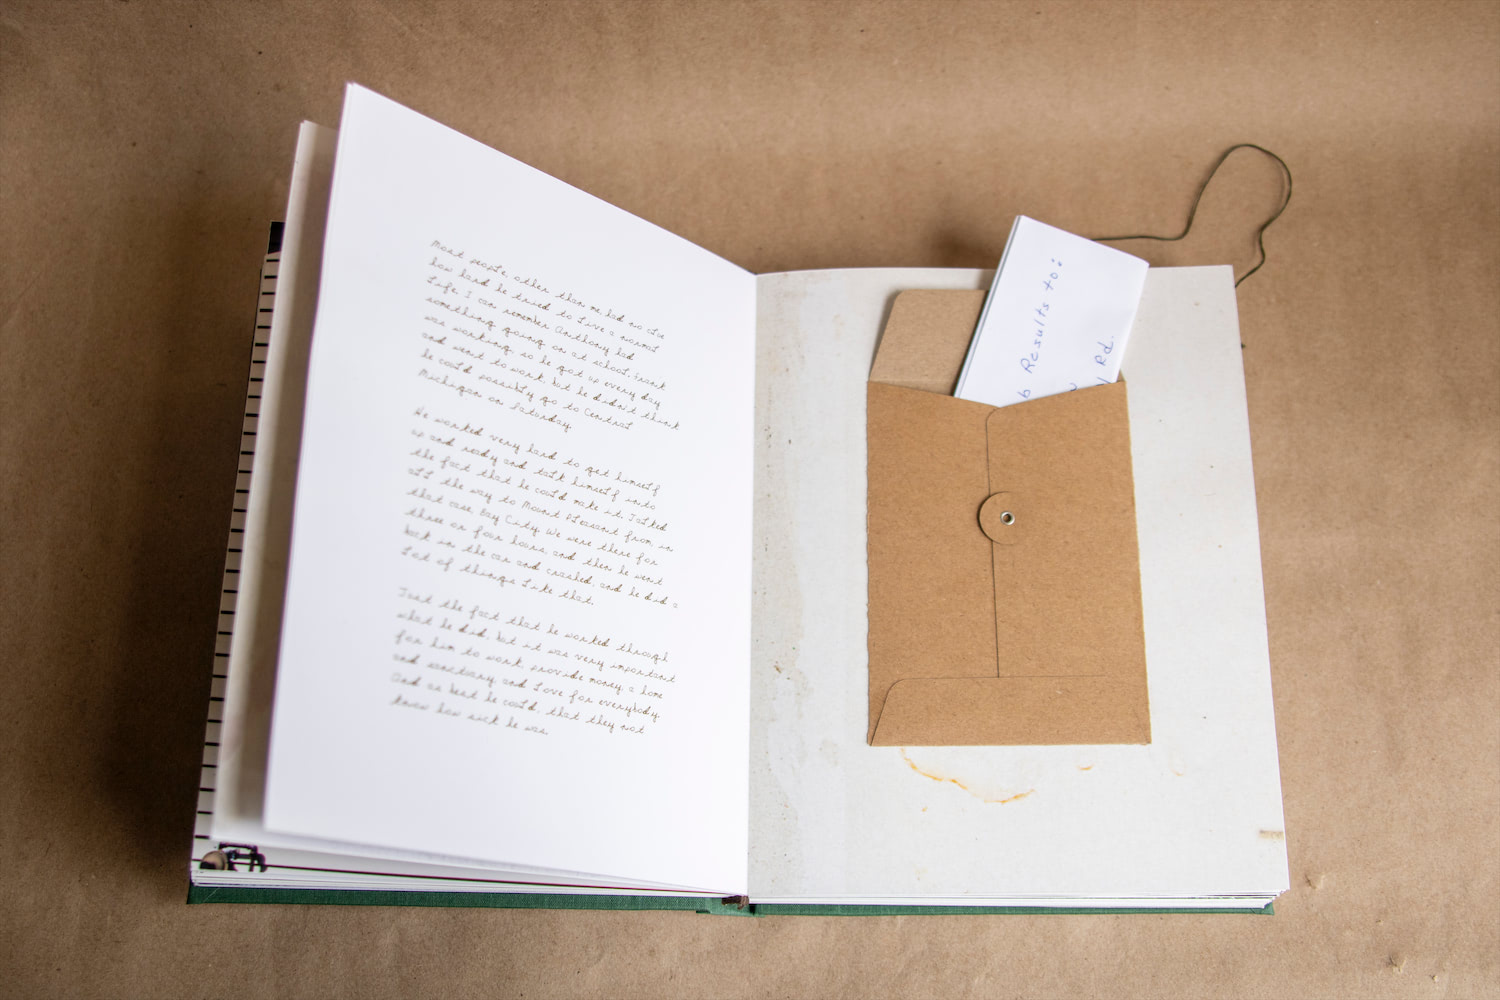 An opened spread of a book showing a body of text on the left and a handmade pocket with a note tucked inside it on the right.